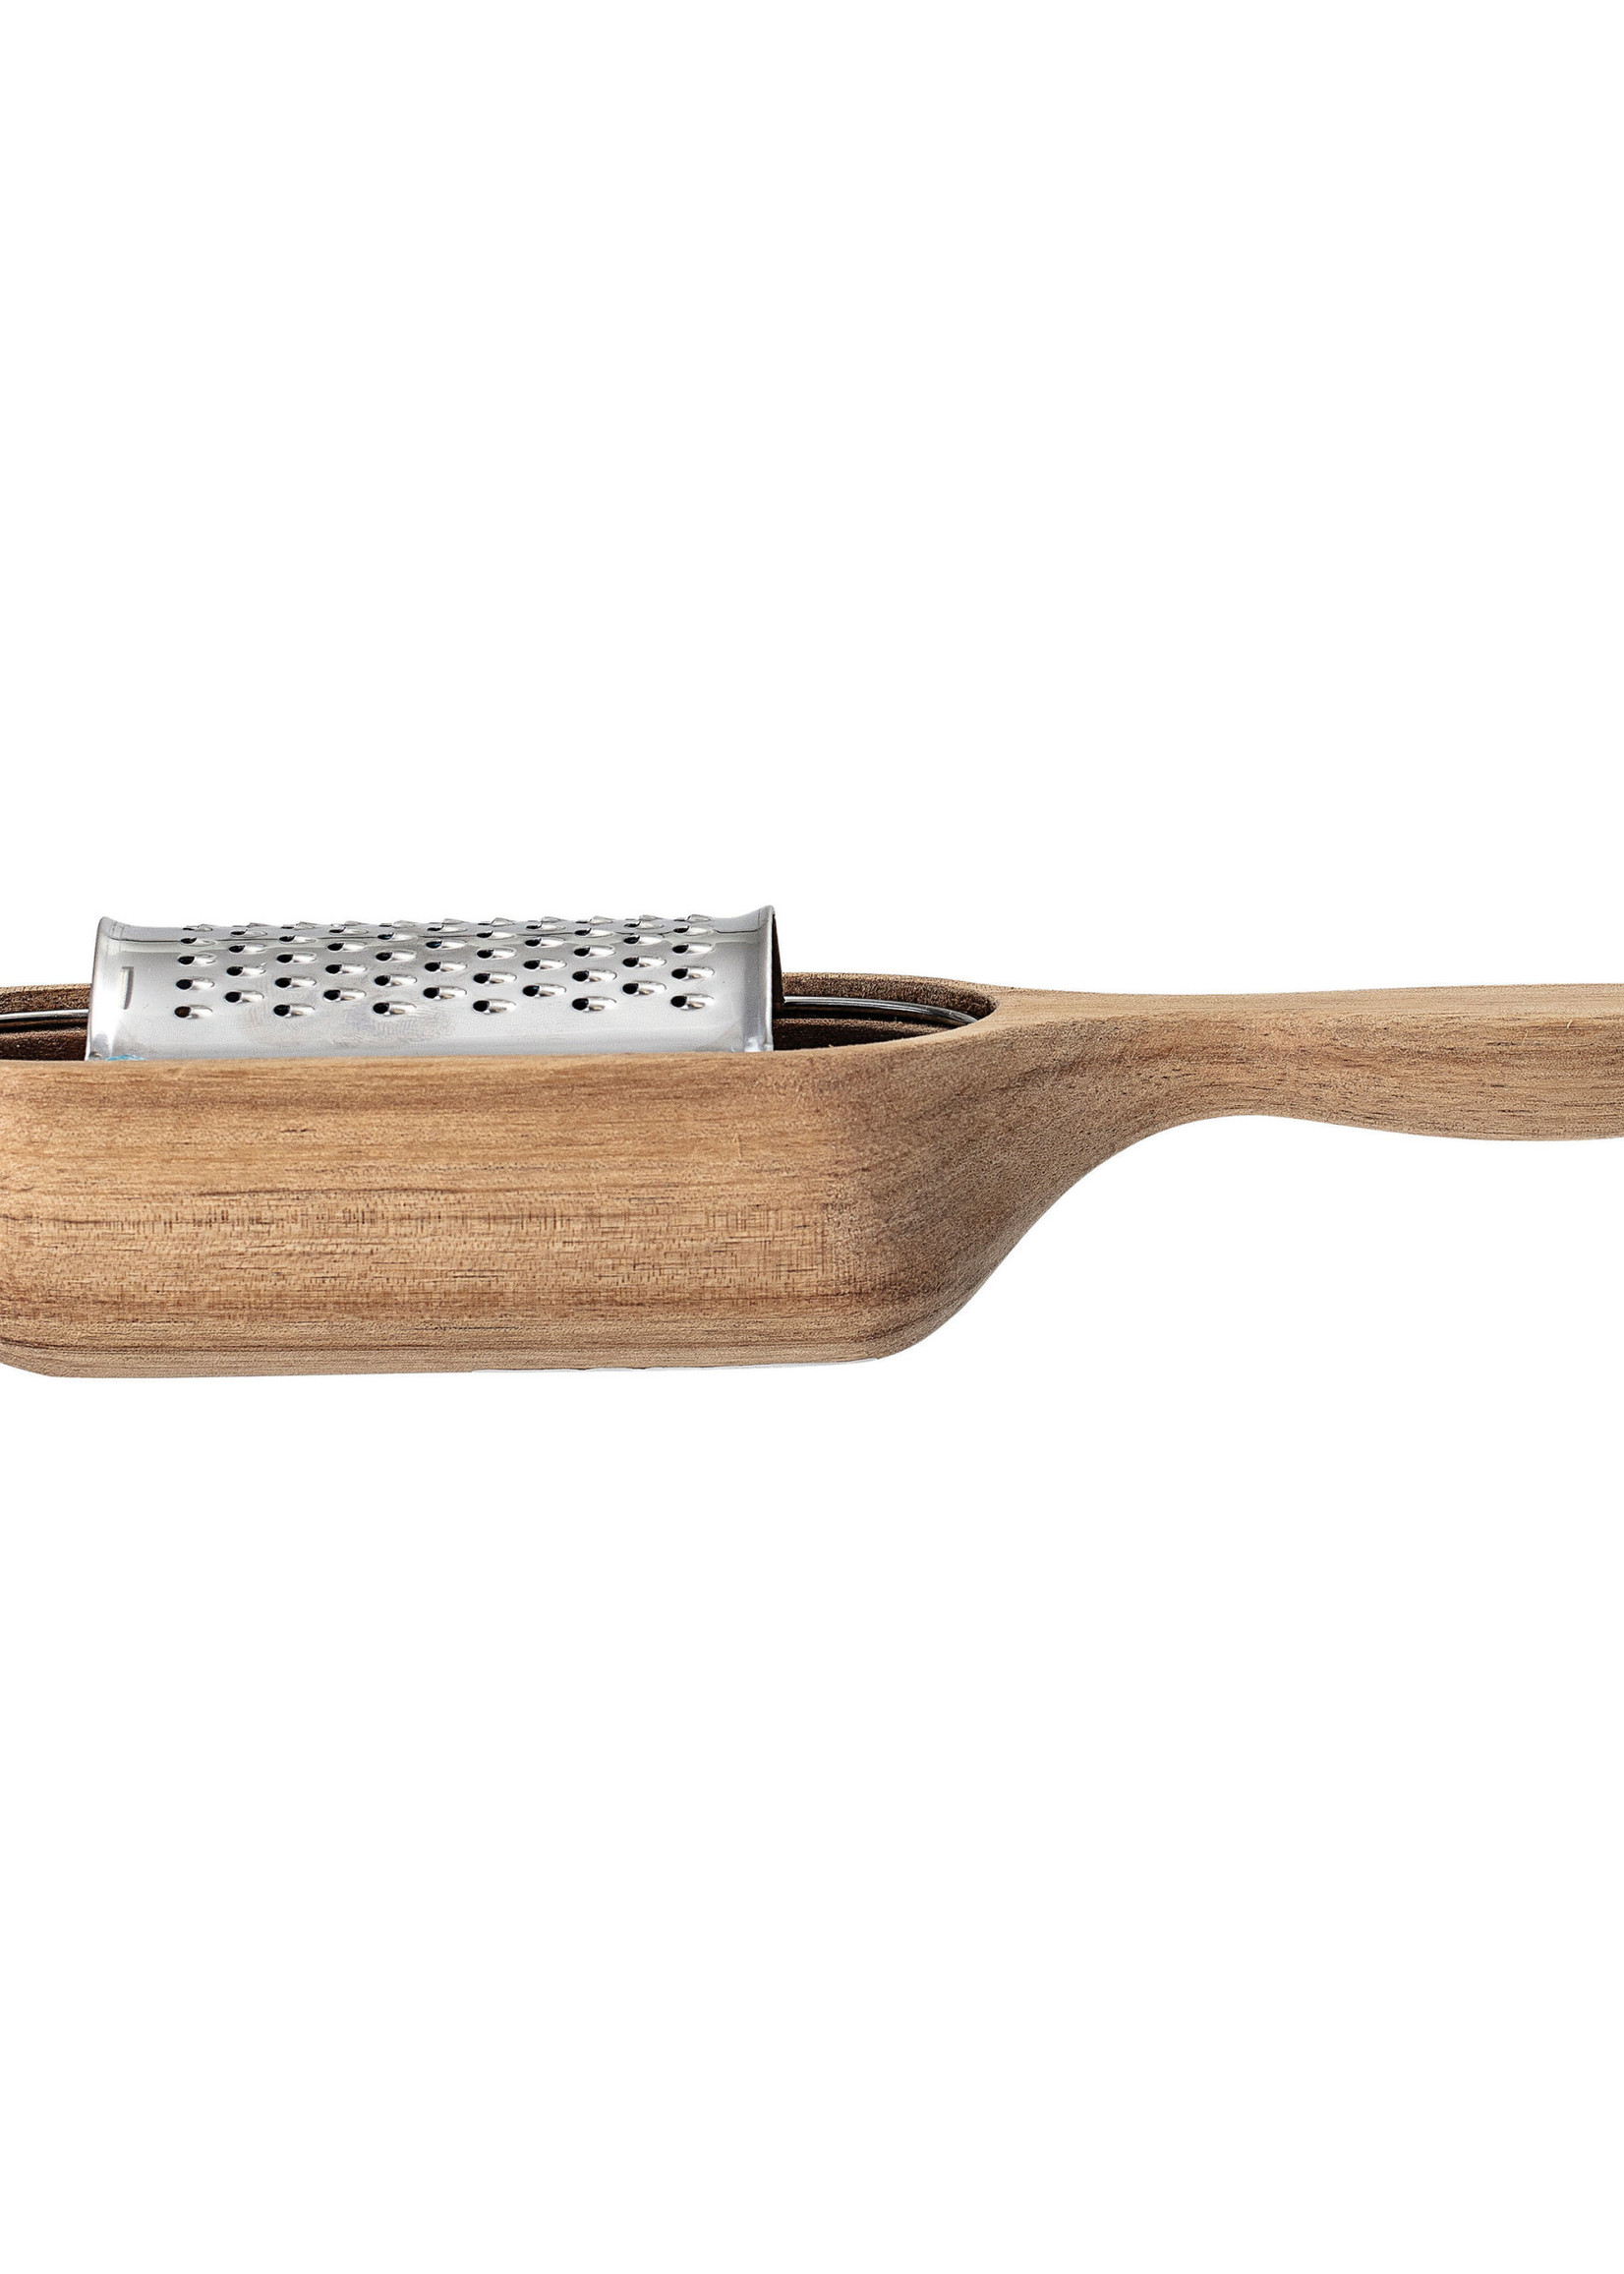 Bloomingville Wood and Stainless Steel Cheese Grater